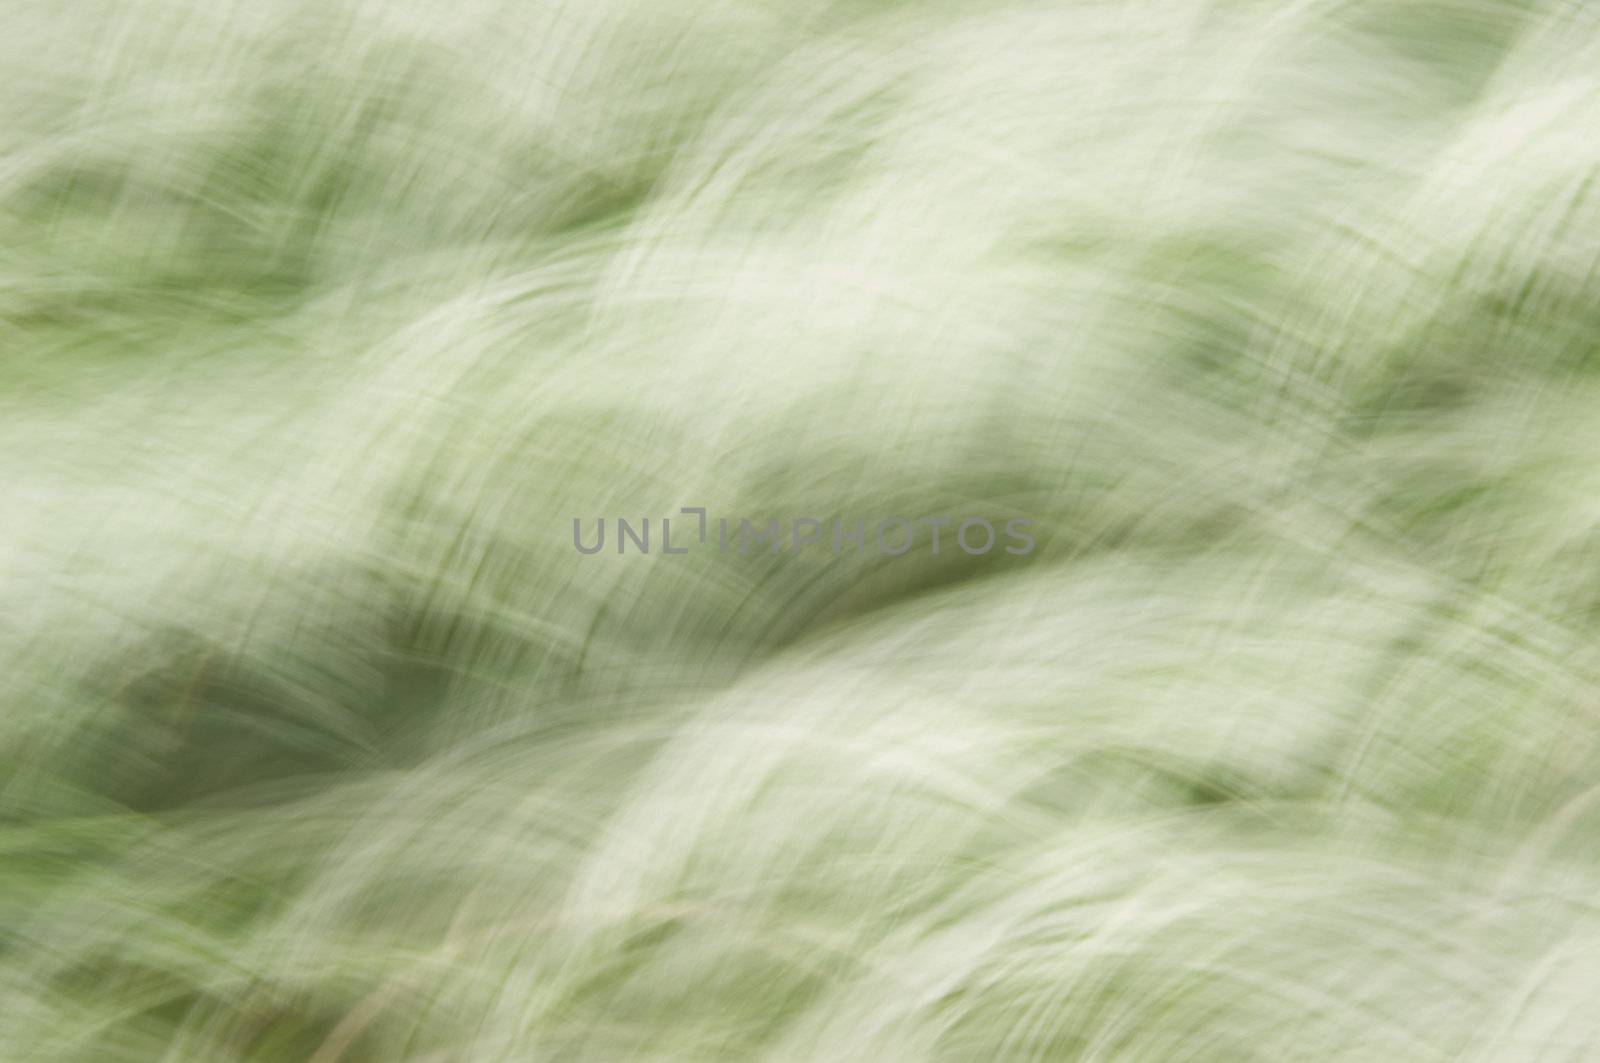 A green and white motion blur abstract texture by Talanis